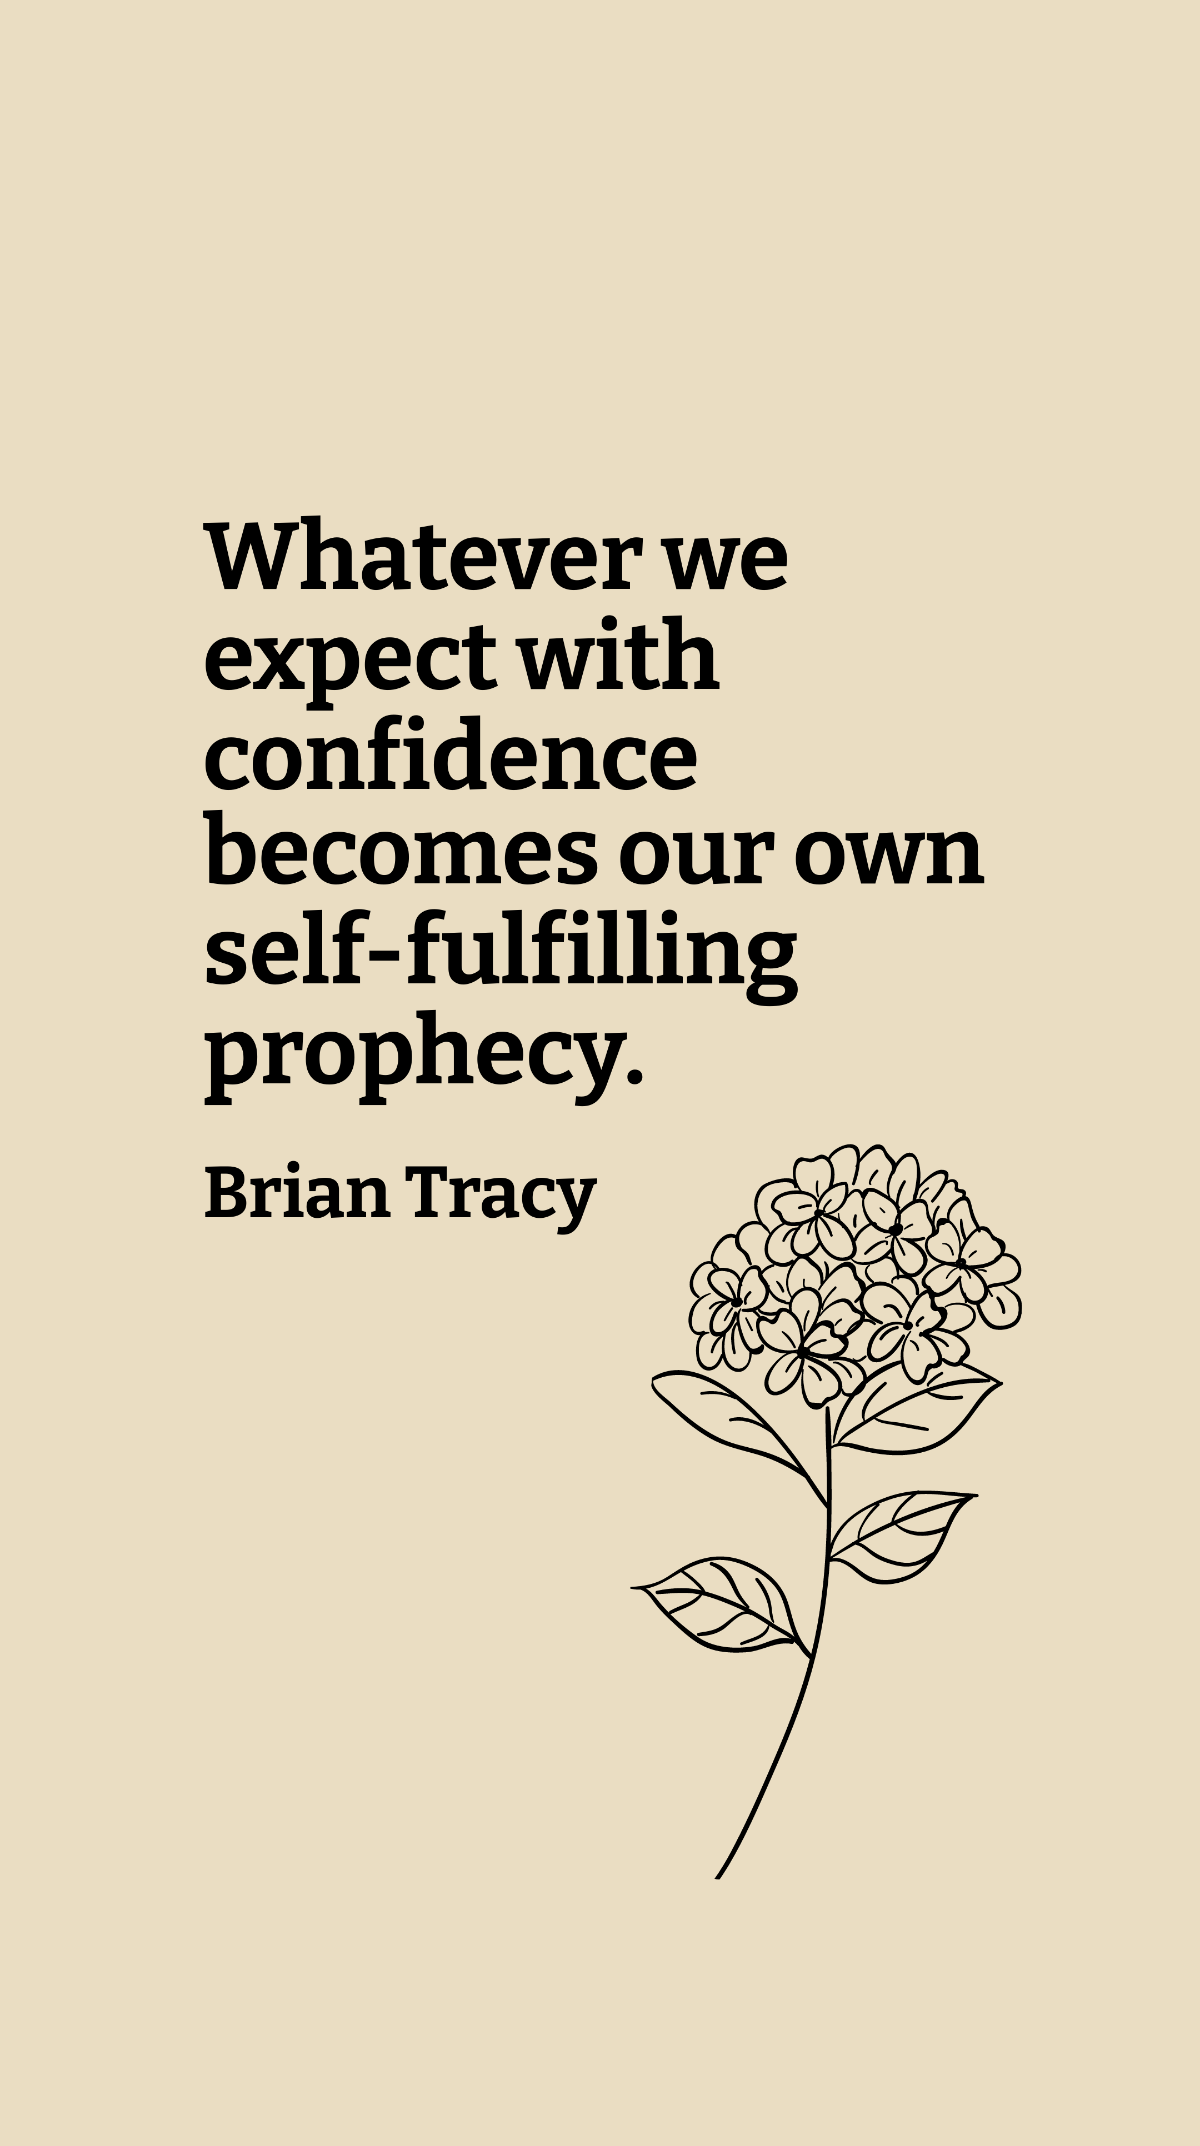 Brian Tracy - Whatever we expect with confidence becomes our own self-fulfilling prophecy.